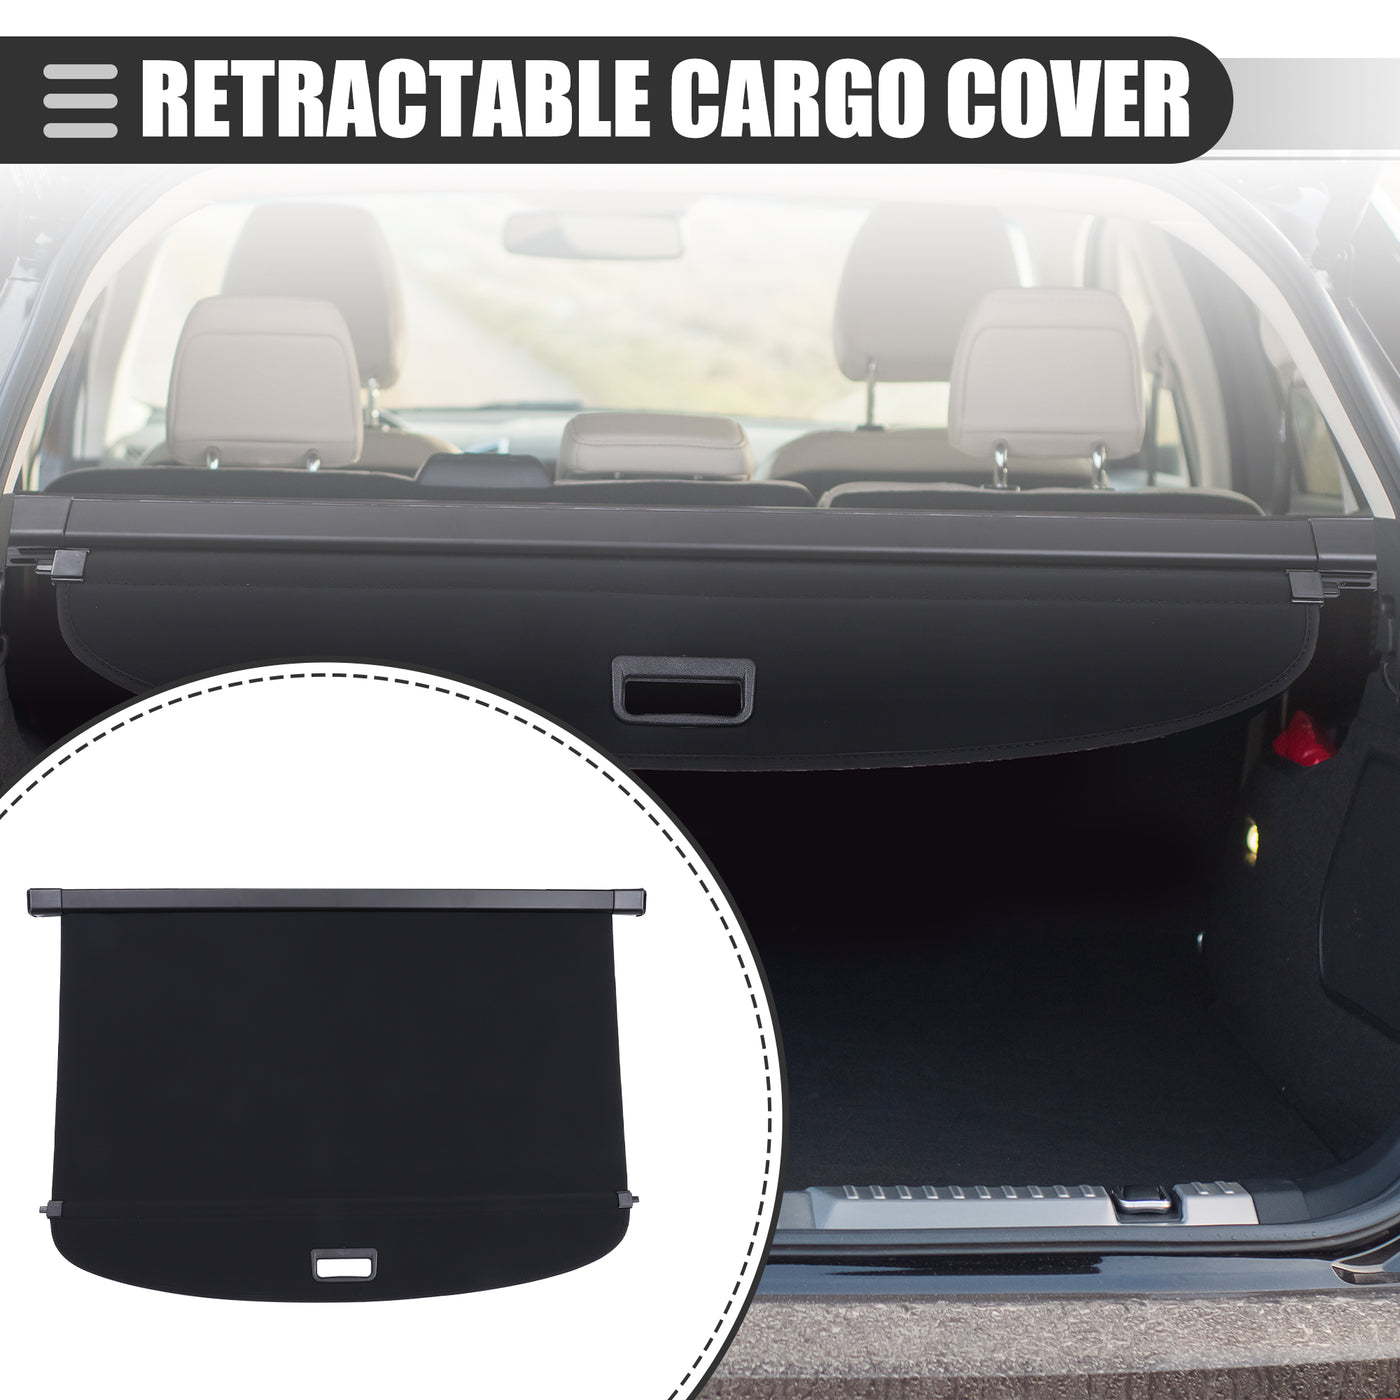 Motoforti Retractable Cargo Cover, Heat Resistant Rear Trunk Security Cover Shield Shade, for Toyota Corolla Cross 2022 2023, Waterproof Canvas, Black